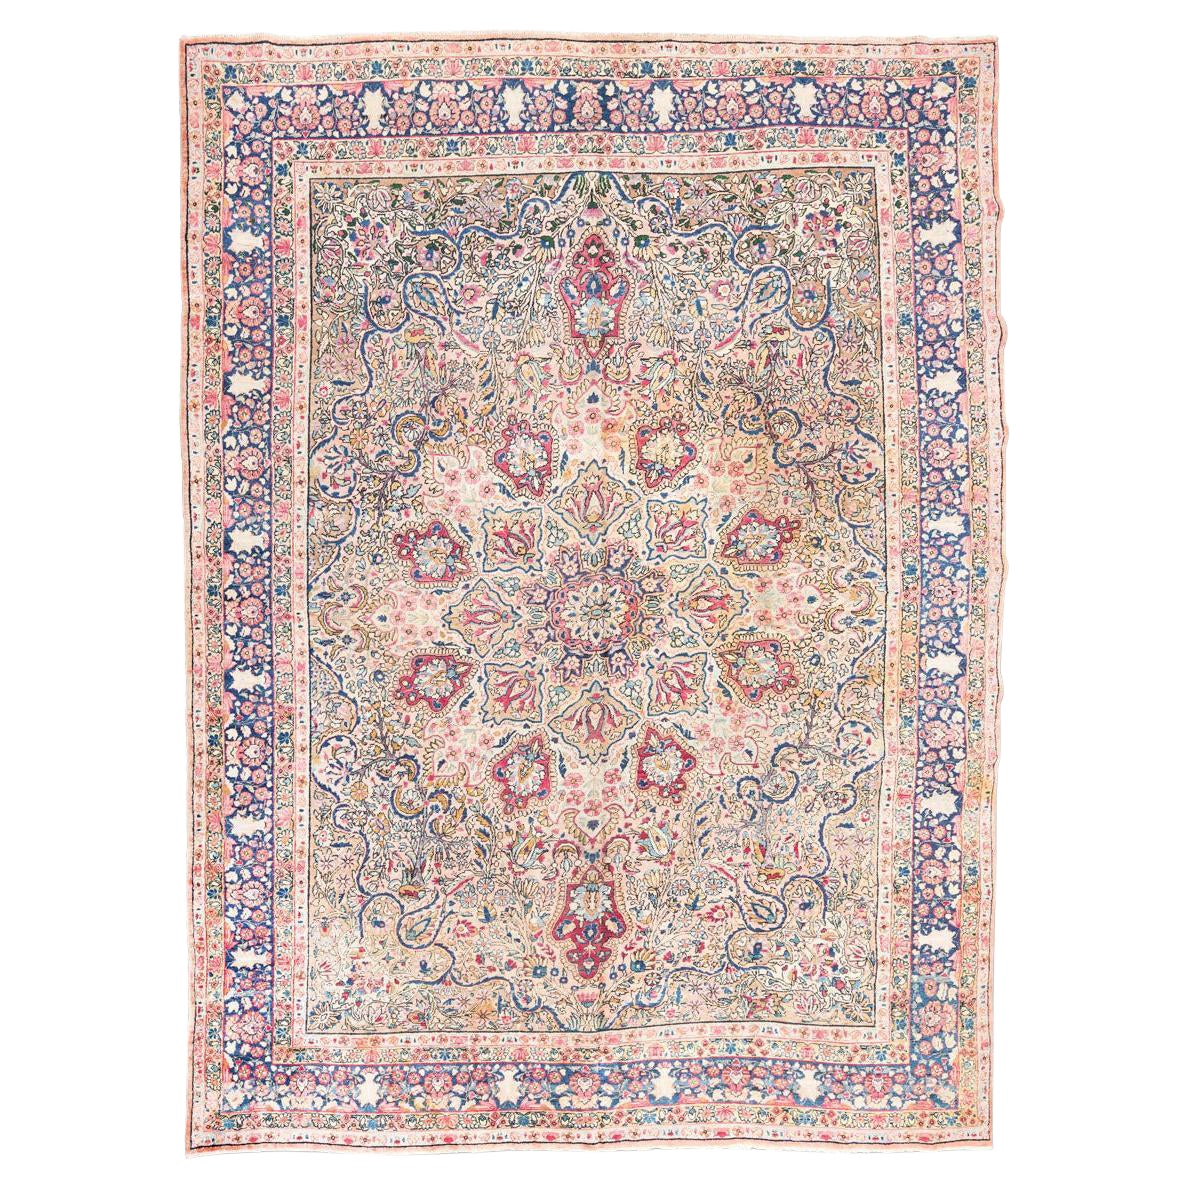 Wool Handmade Kirman Rug Classic Flowers, Leaves and Branches Design.